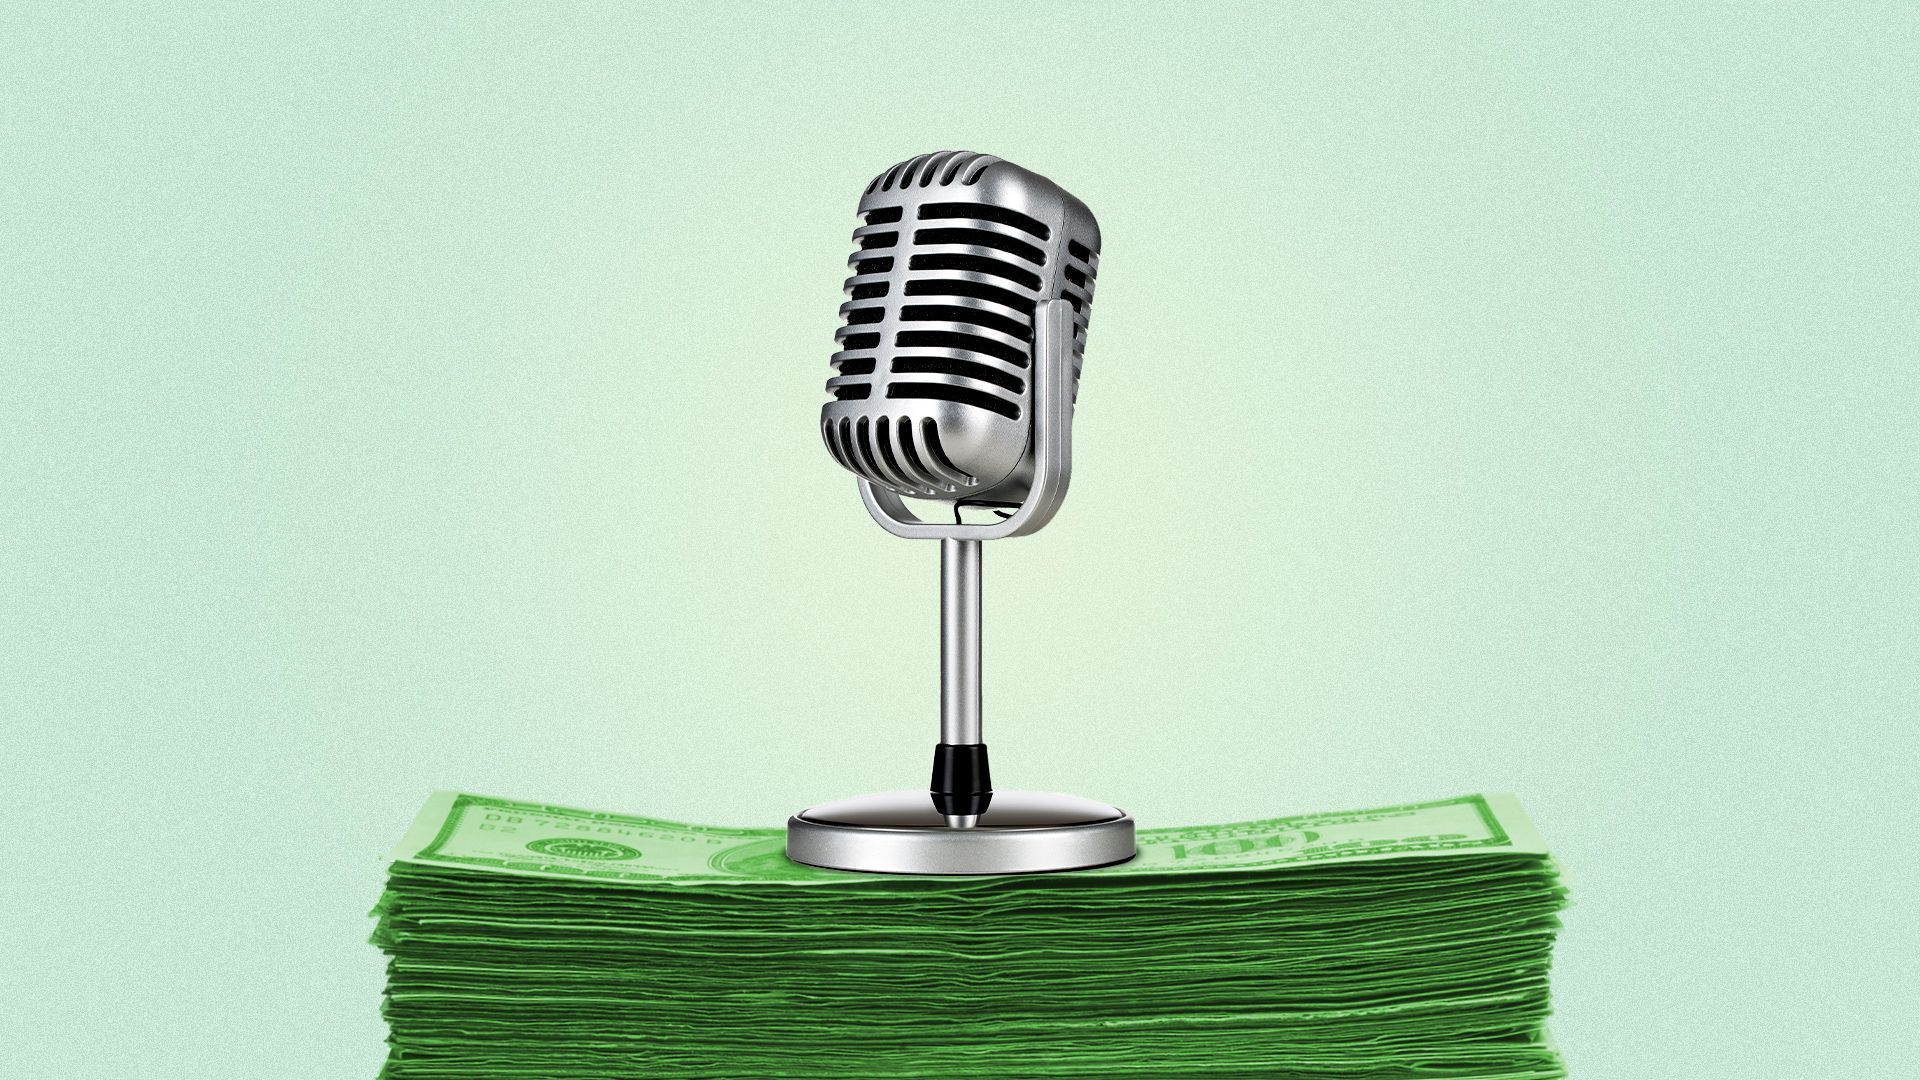 Illustration of a microphone on top of a stack of dollars.